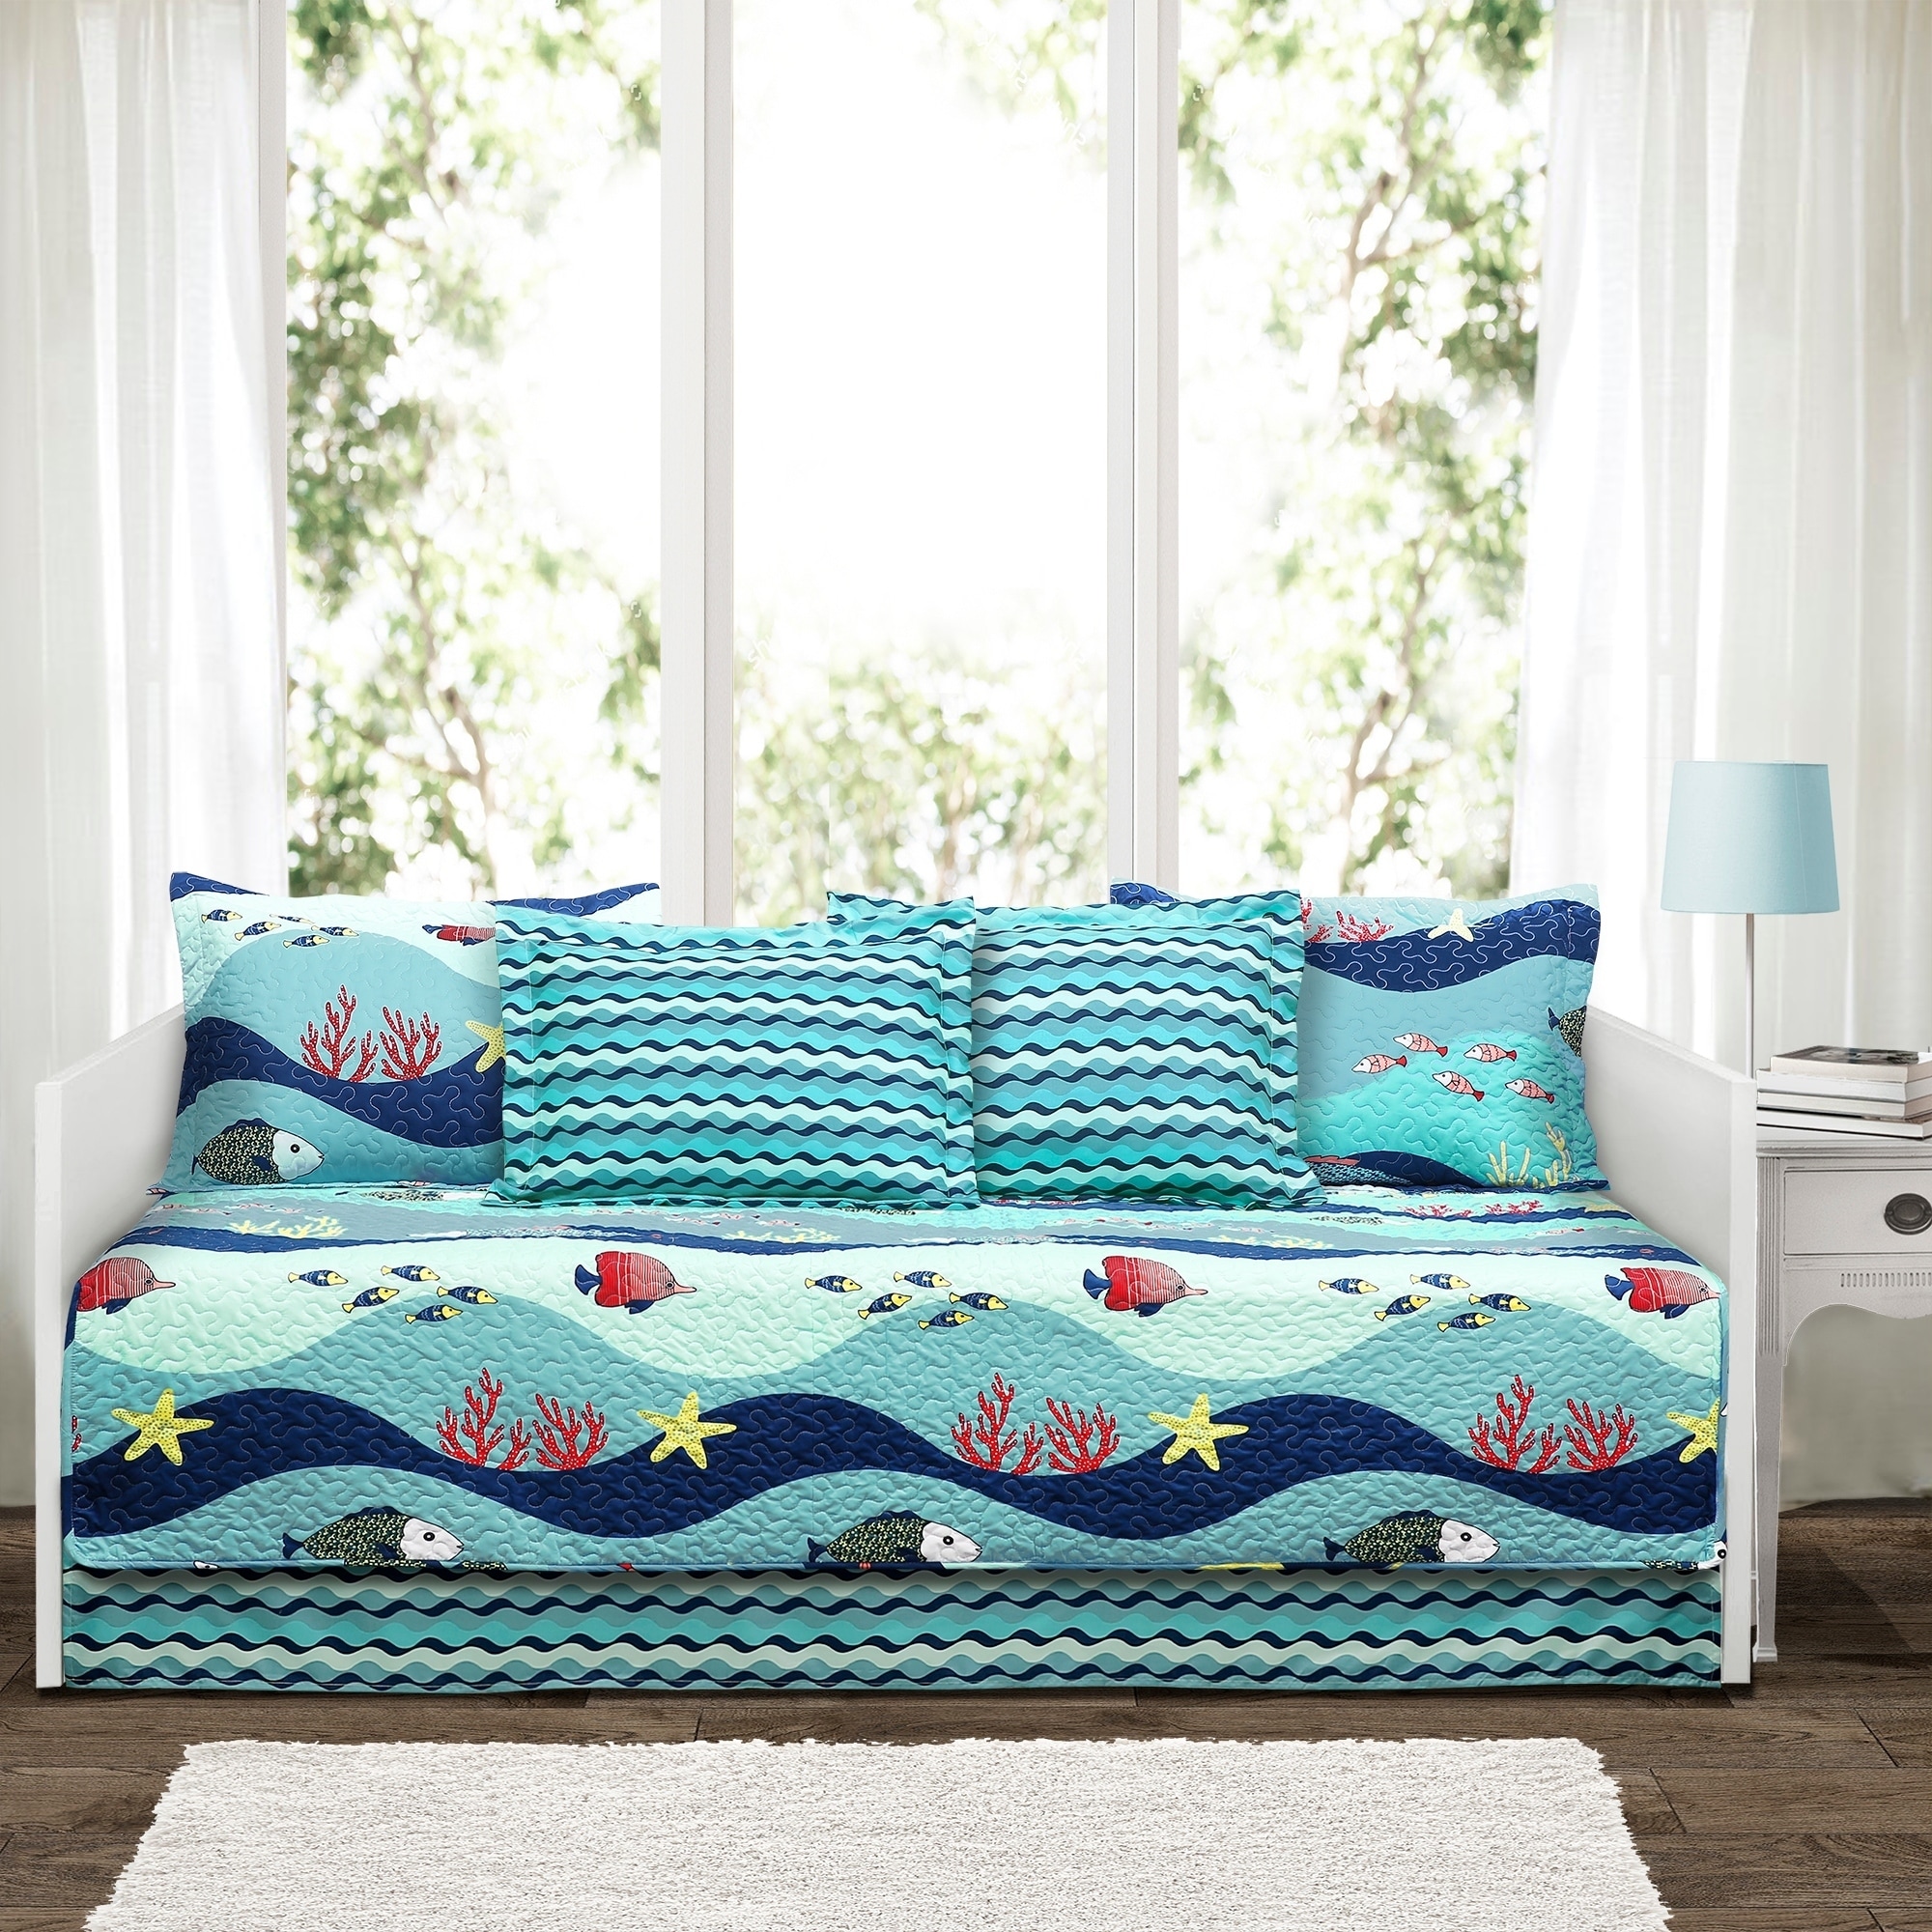 Nautical & Coastal Daybed Cover Sets - Bed Bath & Beyond